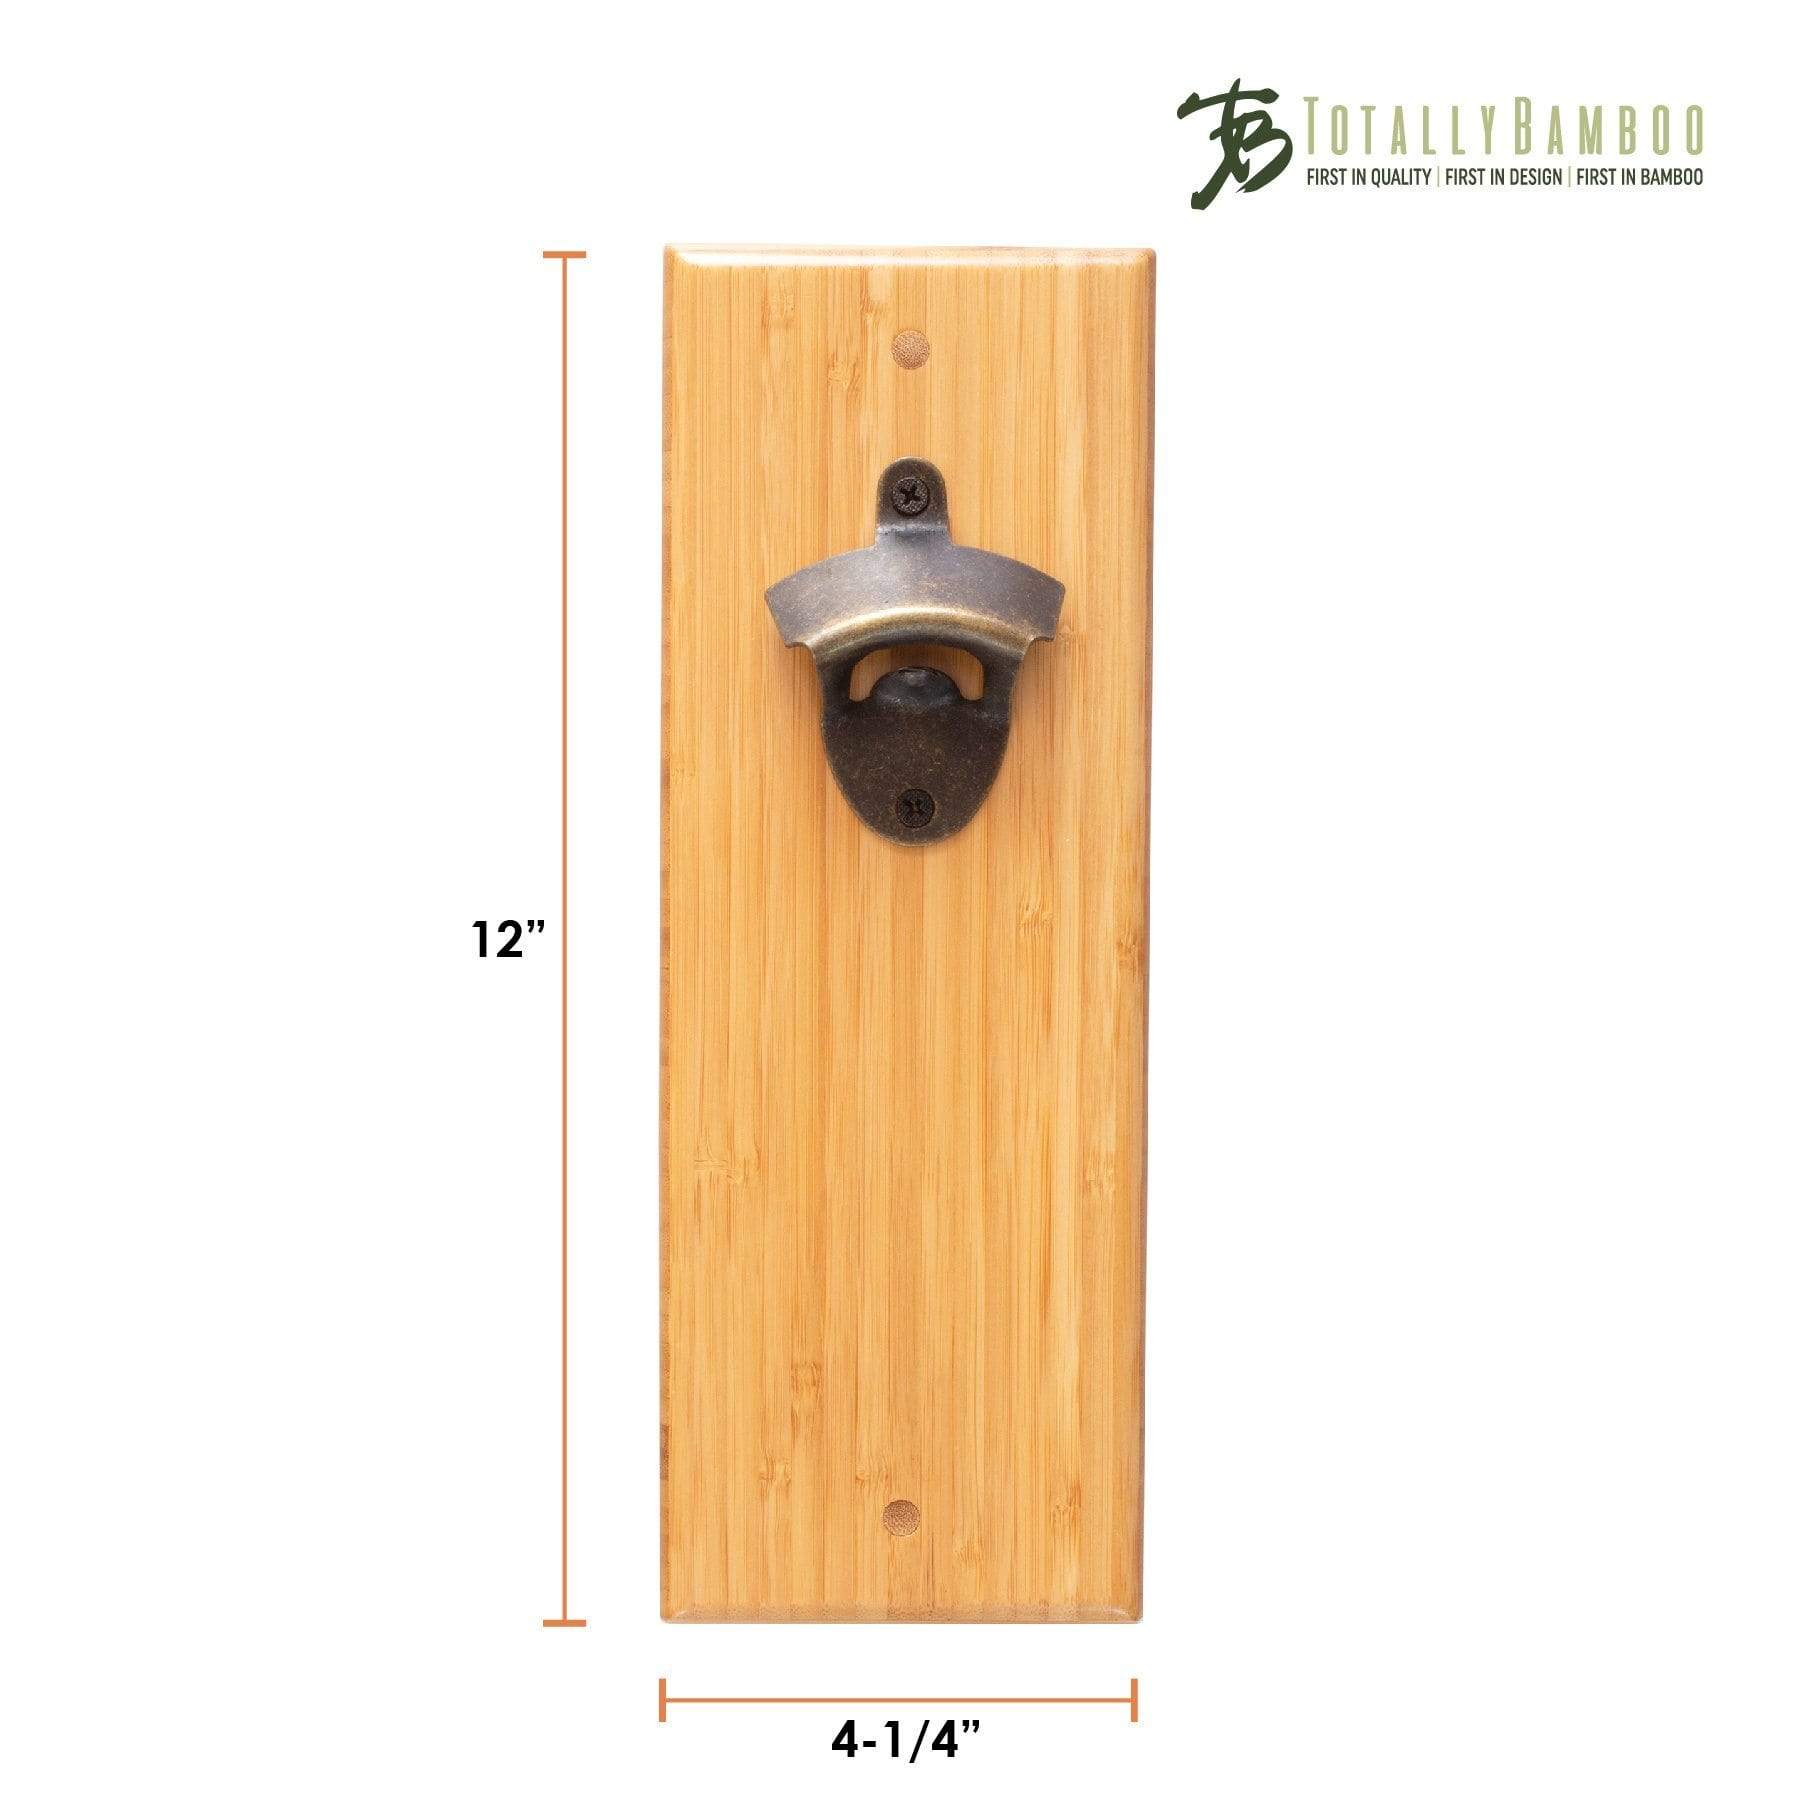 https://totallybamboo.com/cdn/shop/products/wall-mounted-bottle-opener-with-magnetic-bottle-cap-catcher-totally-bamboo-648283.jpg?v=1627824242